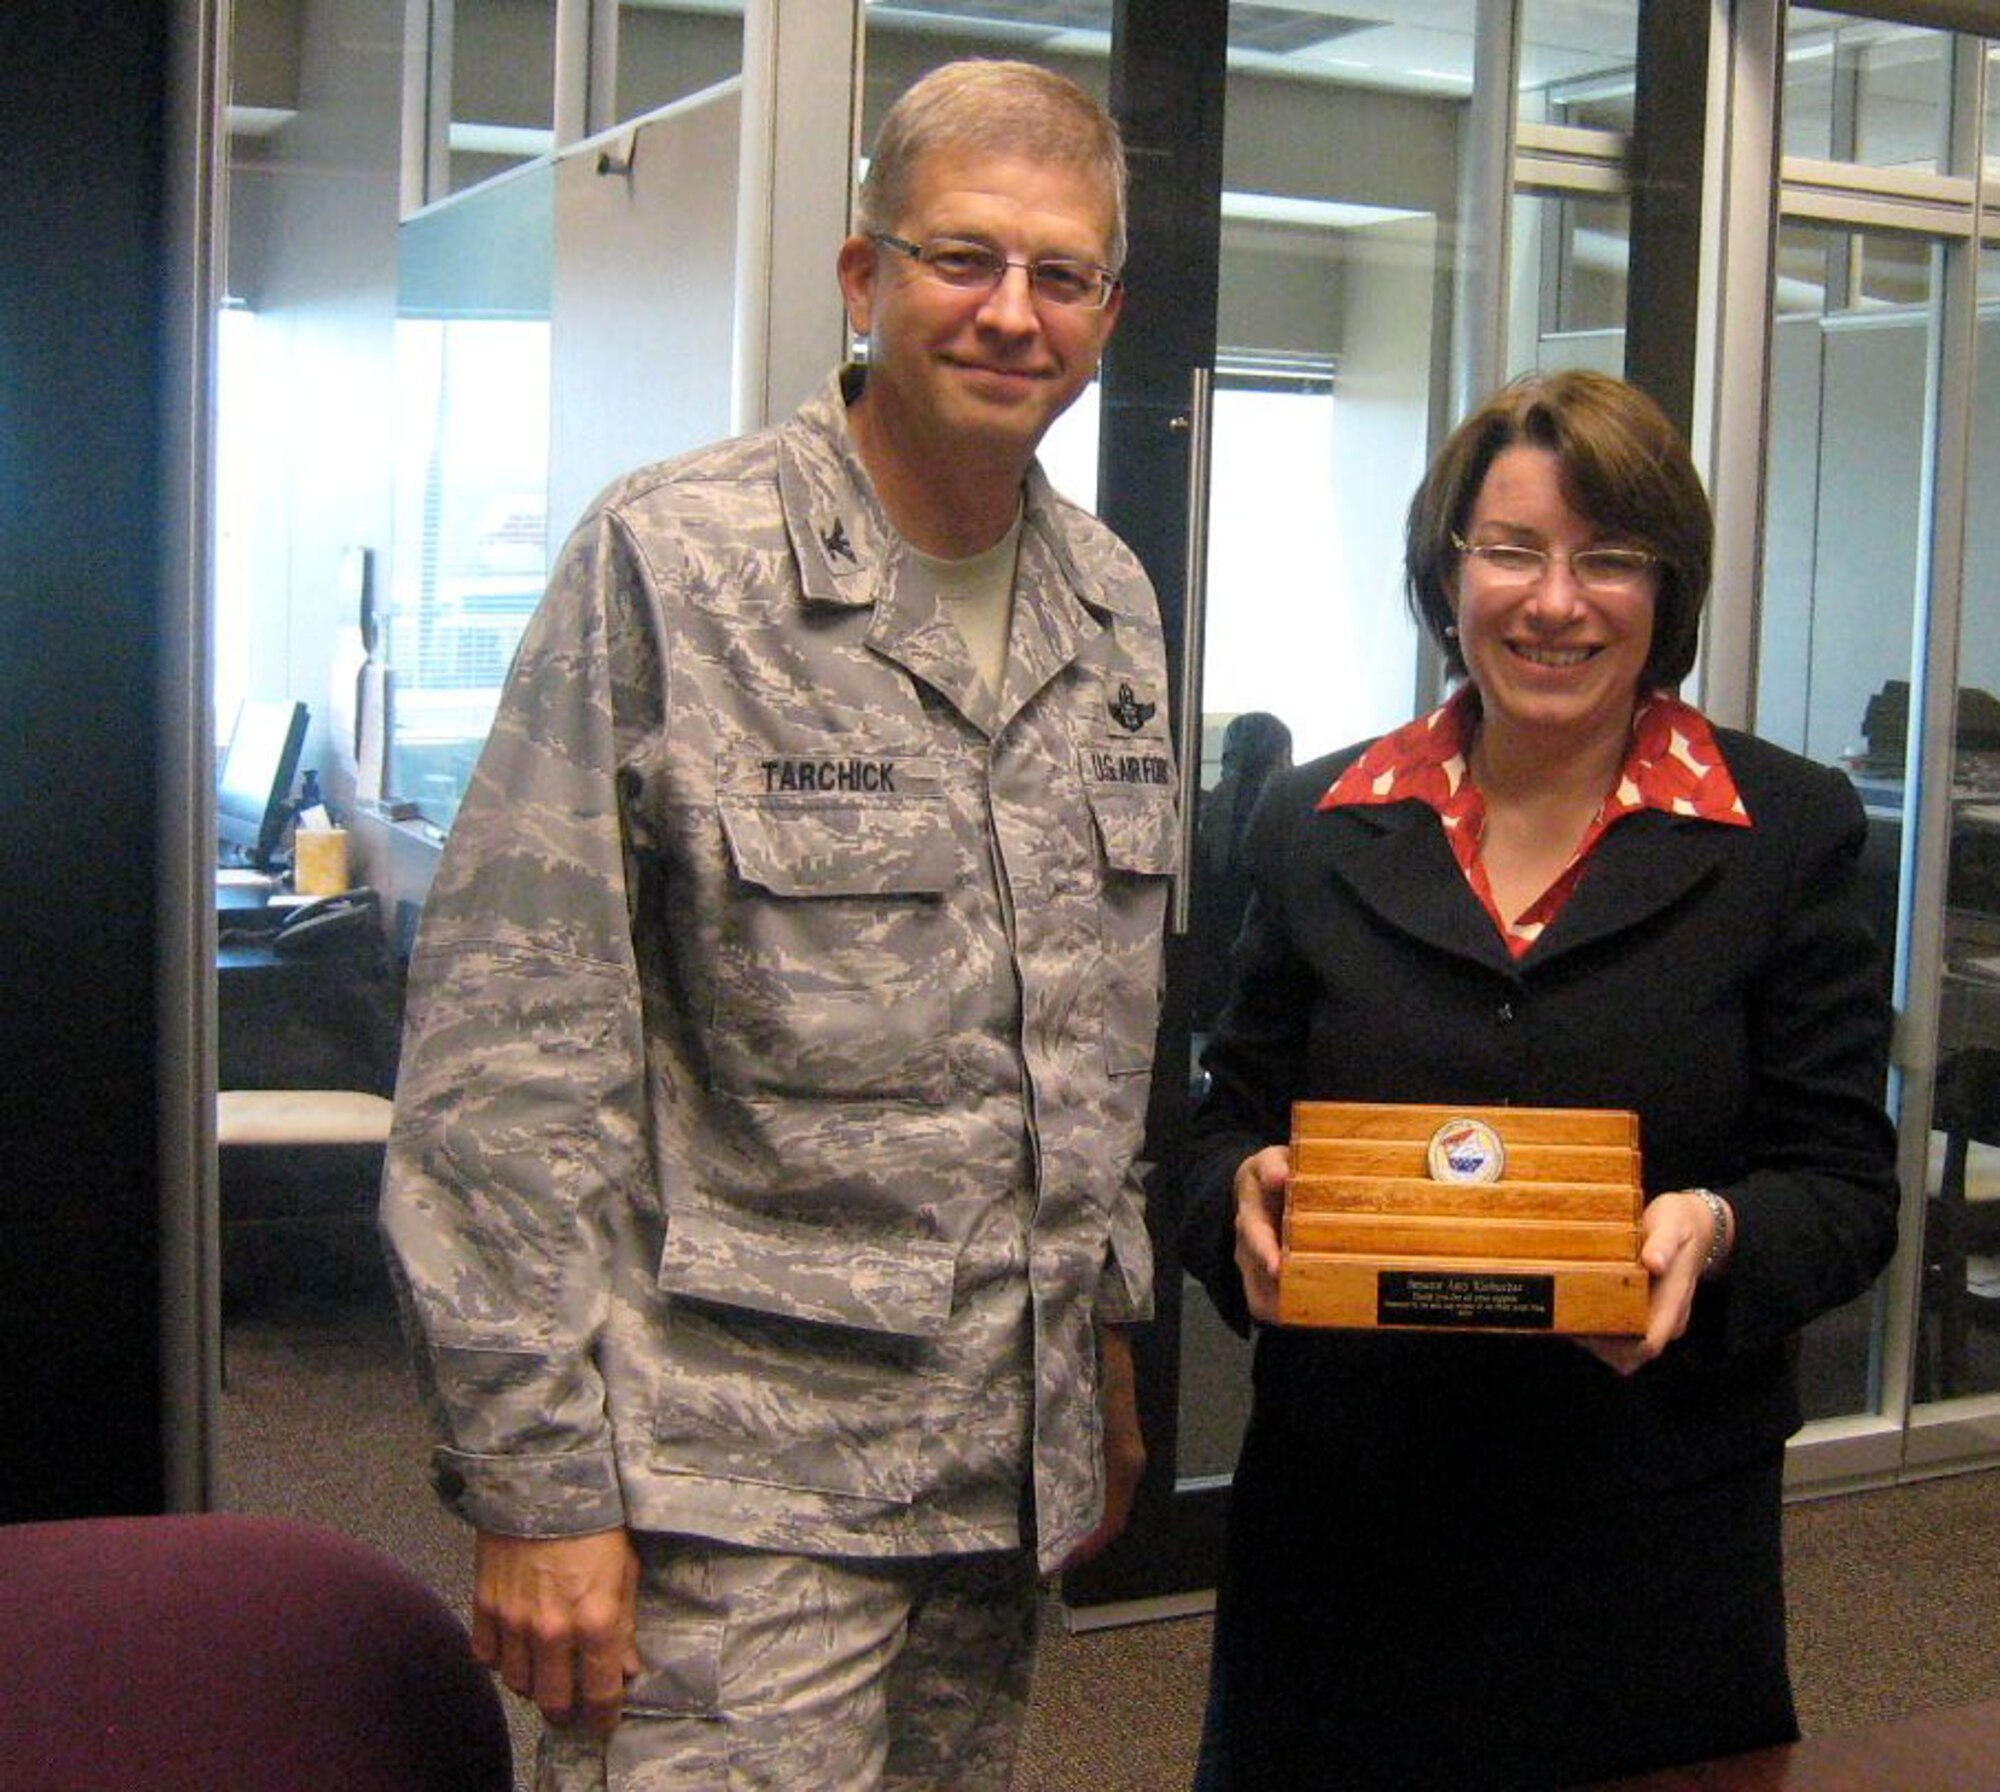 Col. Tim Tarchick, 934th Airlift Wing commander, presents Sen. Amy Klobuchar, with a 934th Airlift Wing coin and display rack in appreciation of her support for the men and women of the Wing. (Air Force Photo/Capt. S.J. Brown)